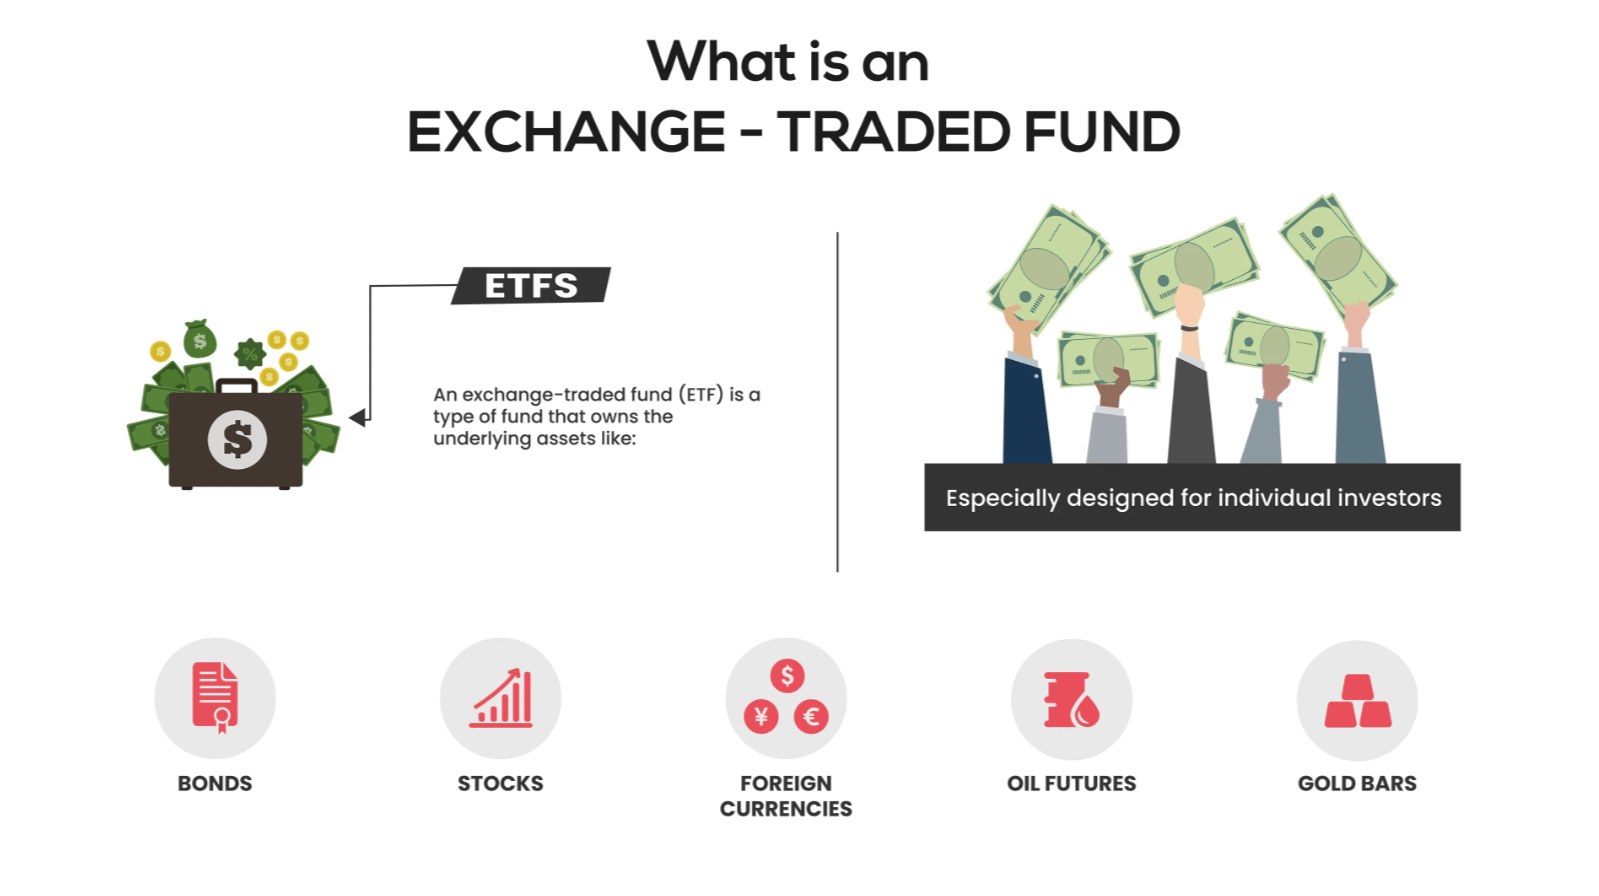 What is an ETF